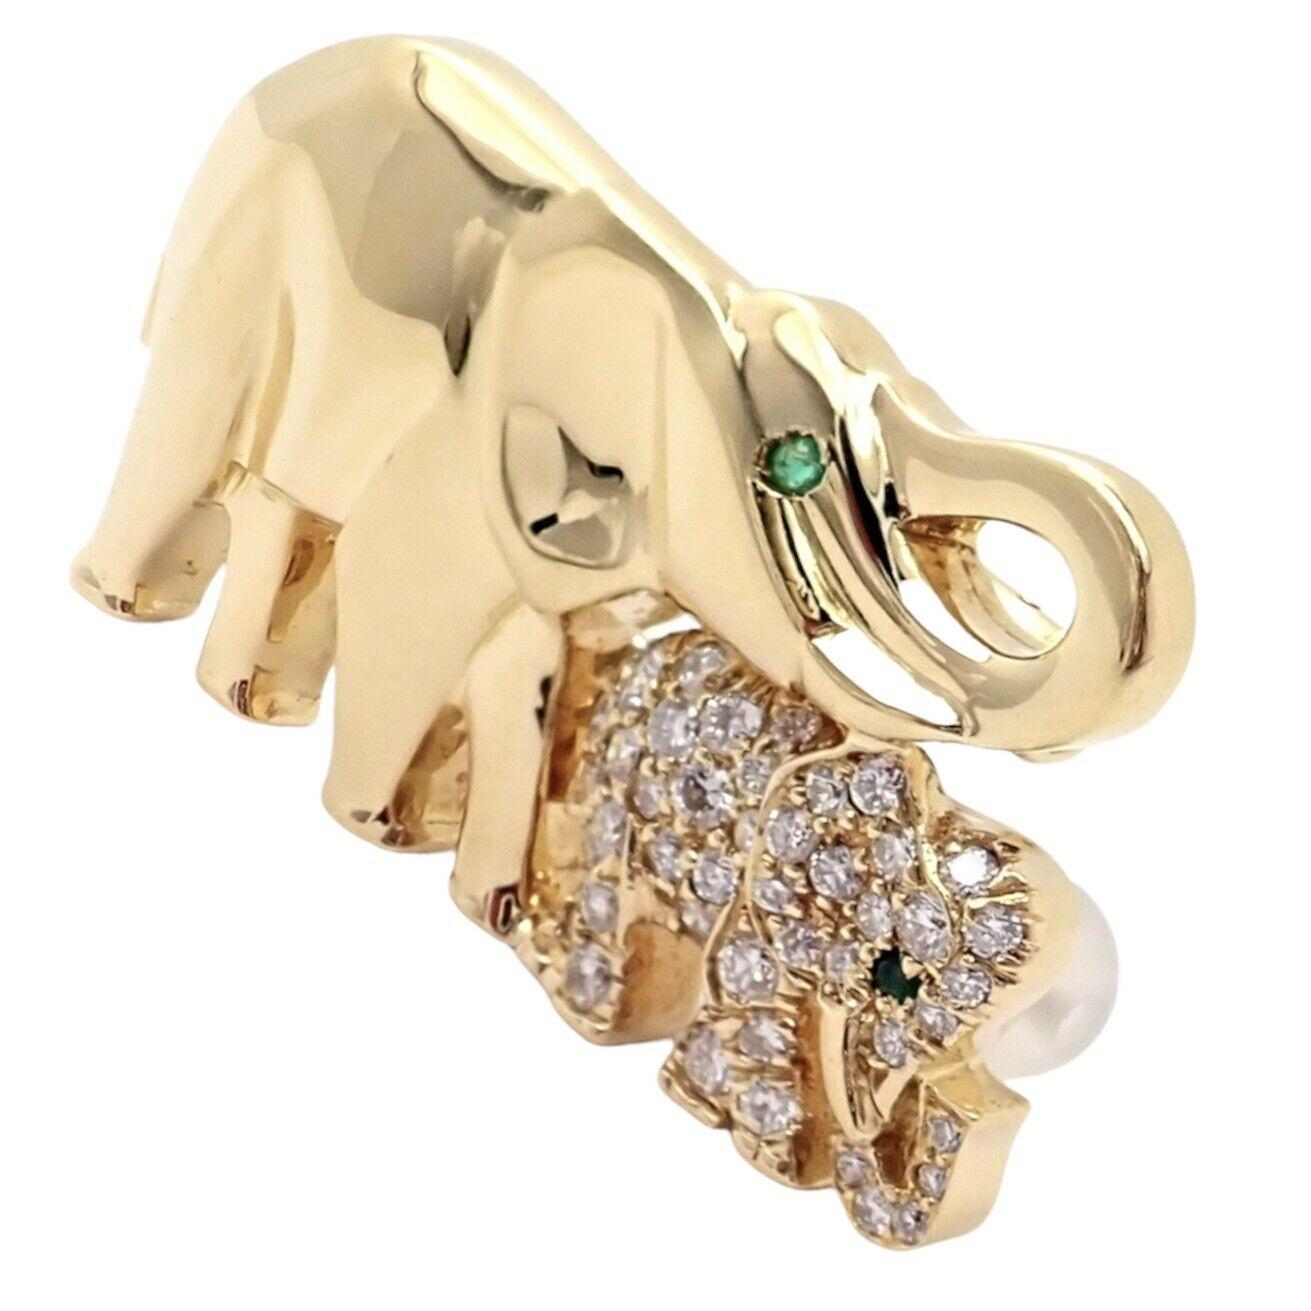 18k Yellow Gold Diamond Emerald Mother and Child Elephant Brooch Pin by Cartier. 
With 2 Round Emeralds
43 Round Brilliant Cut Diamonds, G/VVS1 Approximately 0.50ctw
This brooch comes with a service paper from a Cartier store.
Details: